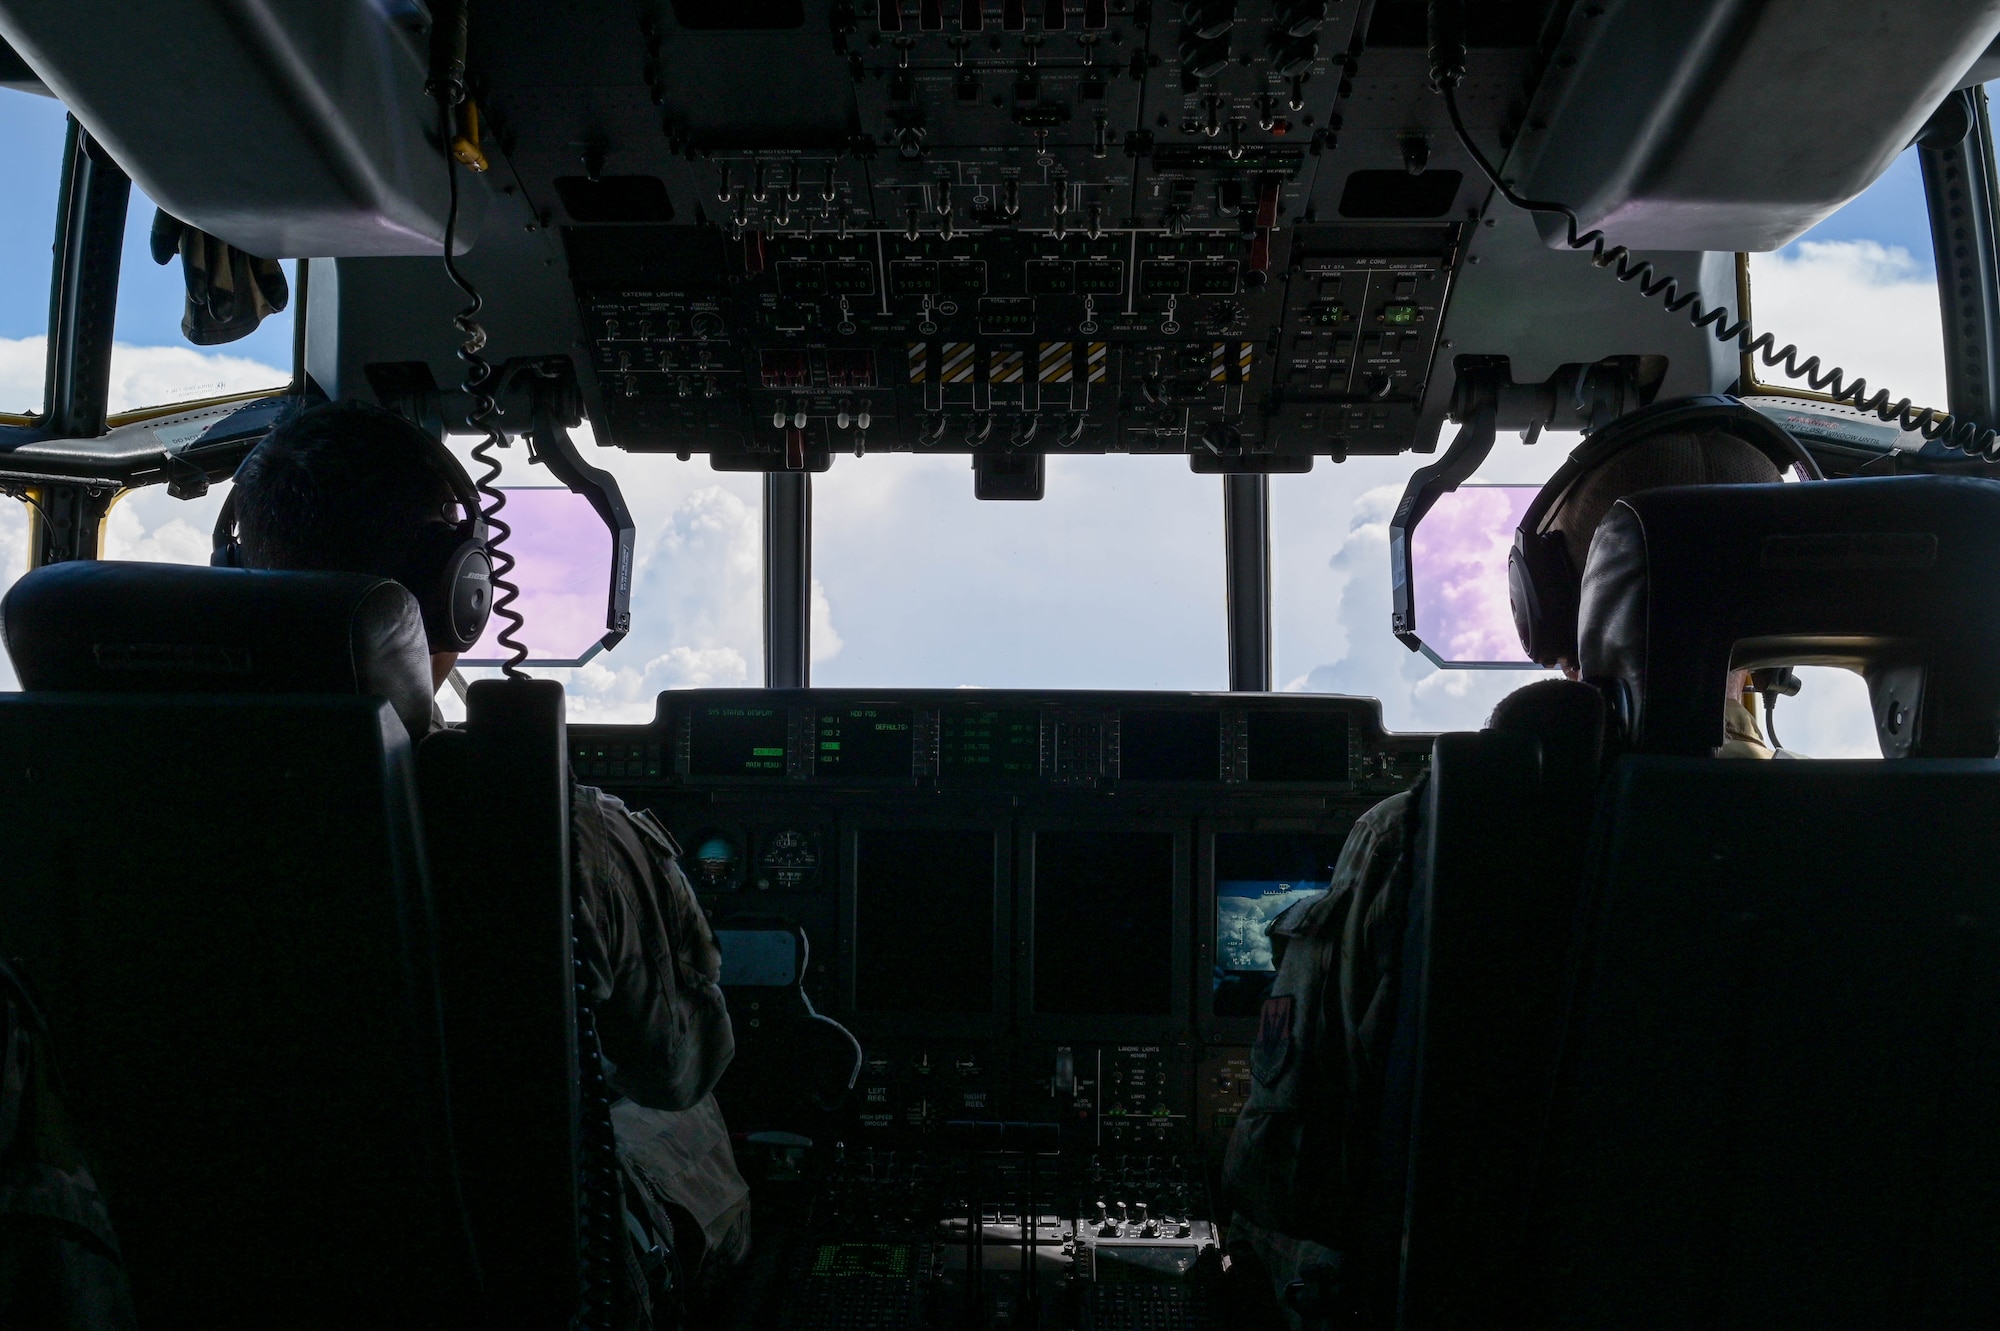 U.S. Air Force Lt. Col. Phillip Varelik, left, and Maj. Patrick Robinson, 71st Rescue Squadron HC-130J Combat King II pilots, fly out of Moody Air Force Base, Georgia, Aug. 24, 2021. The aerial refueling capabilities of the HC-130J increases the combat range of rescue forces, supporting prolonged missions. The 71st RQS conducted an air-to-air refuel with a KC-46A Pegasus assigned to the 916th Air Refueling Wing, Seymour Johnson Air Force Base, North Carolina as the first operational unit to be refueled by the KC-46A Pegasus. (U.S. Air Force photo by Senior Airman Rebeckah Medeiros)